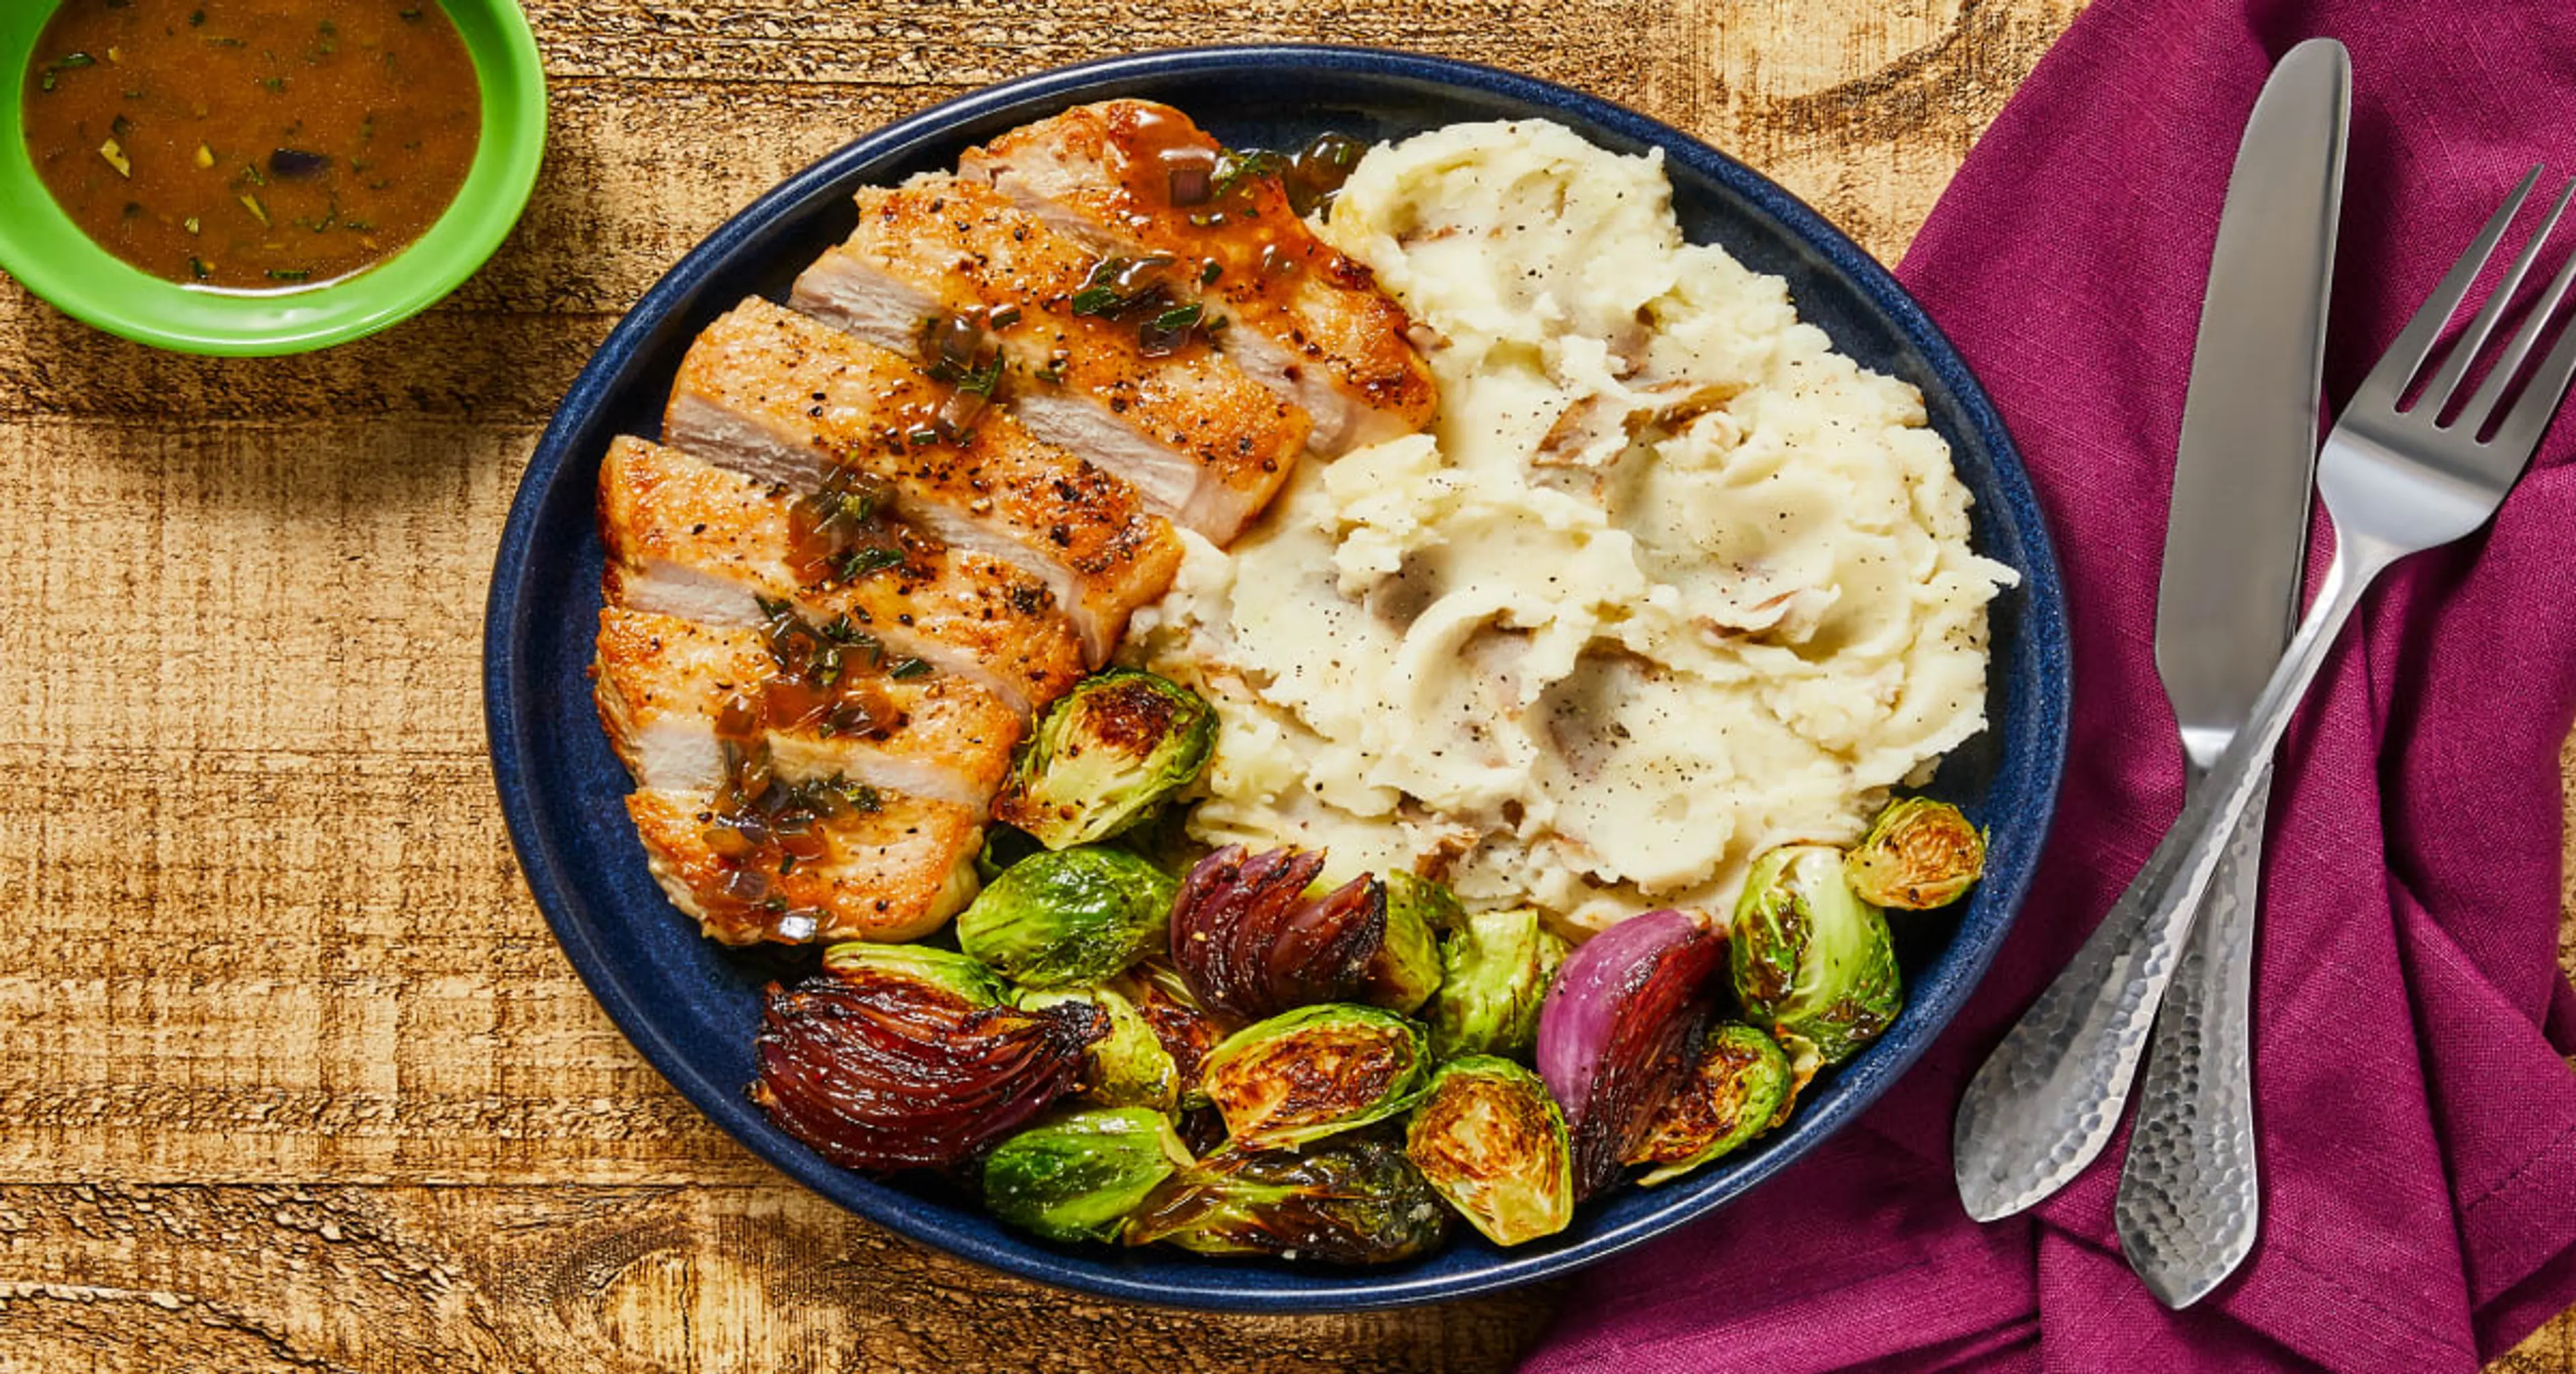 Rosemary Pork Chops with Mashed Potatoes, Brussel Sprouts &